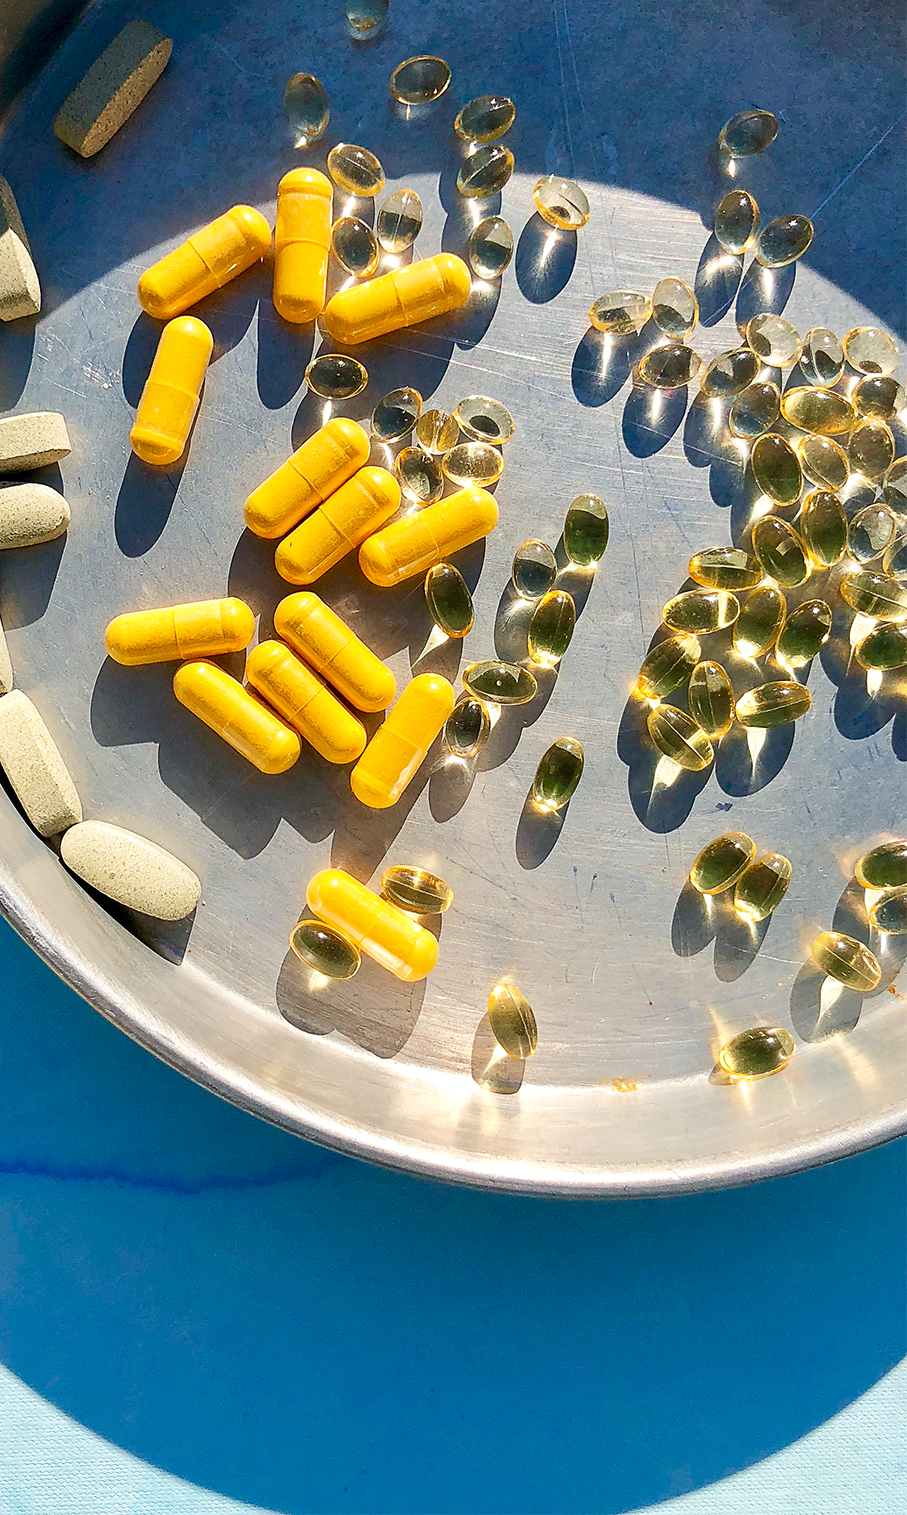 Plate filled with folic acid supplements